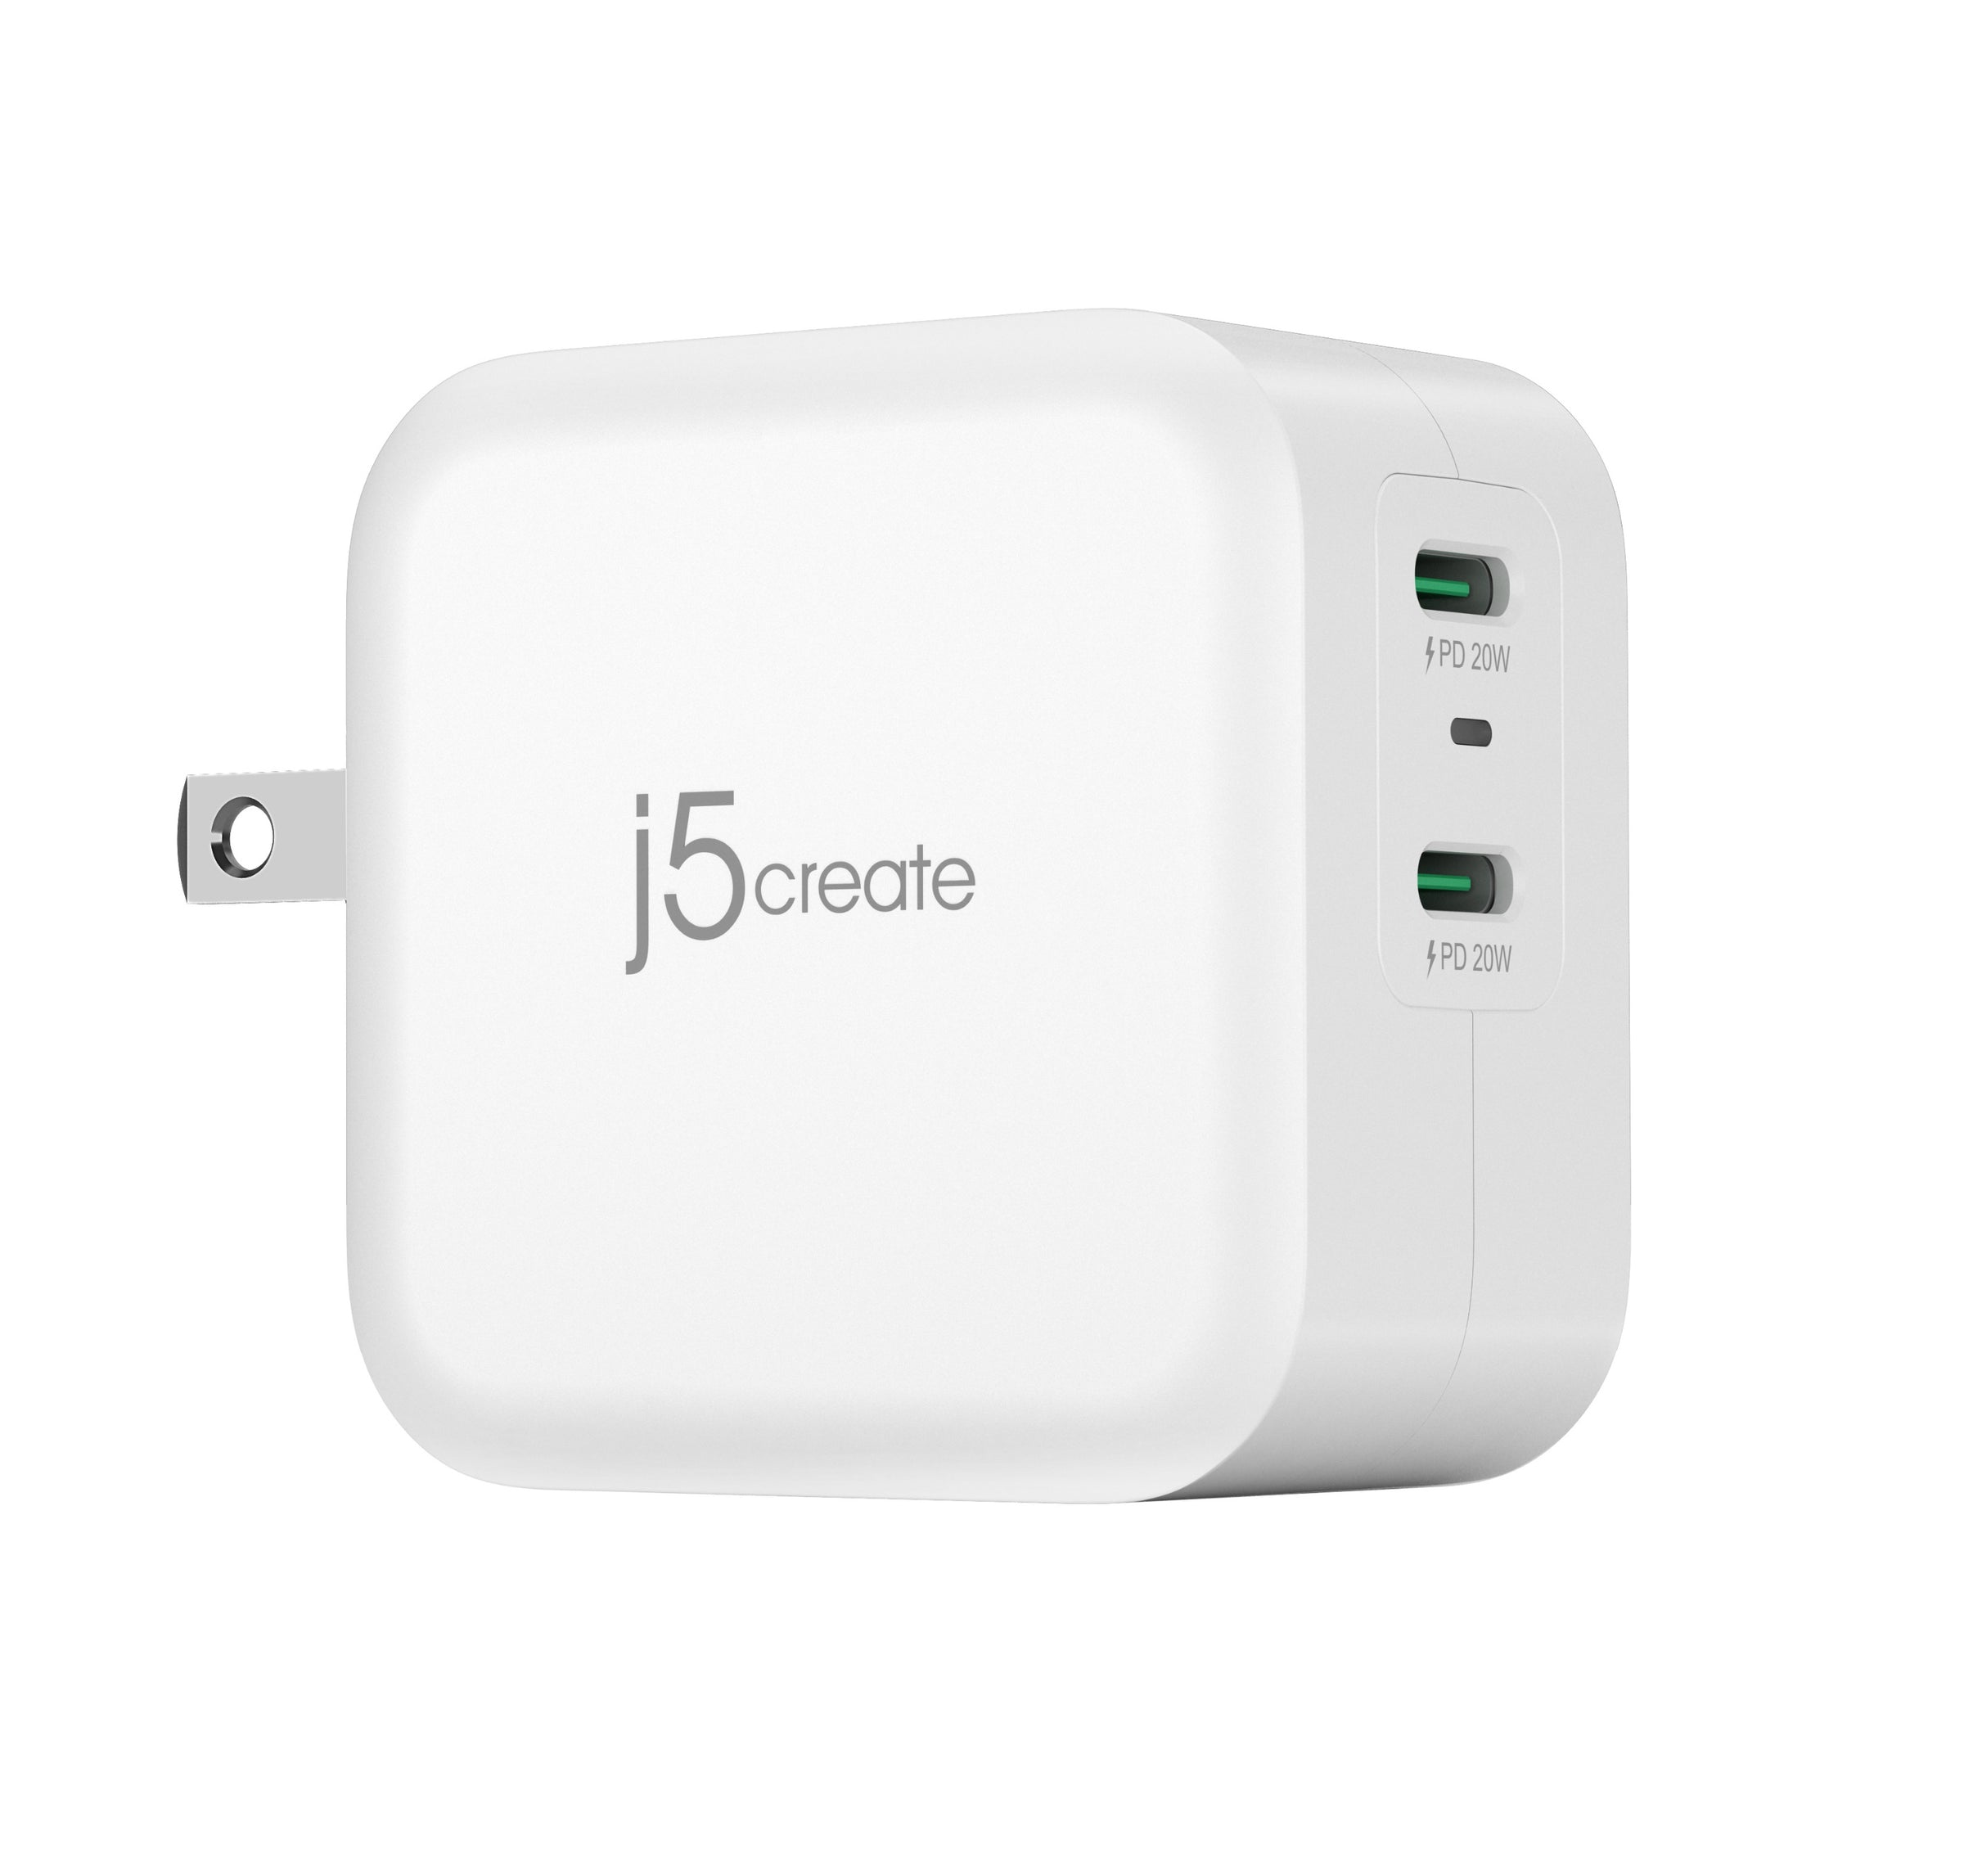 Dual USB-C PD Wall Charger 40W + USB-C to Lightning Cable